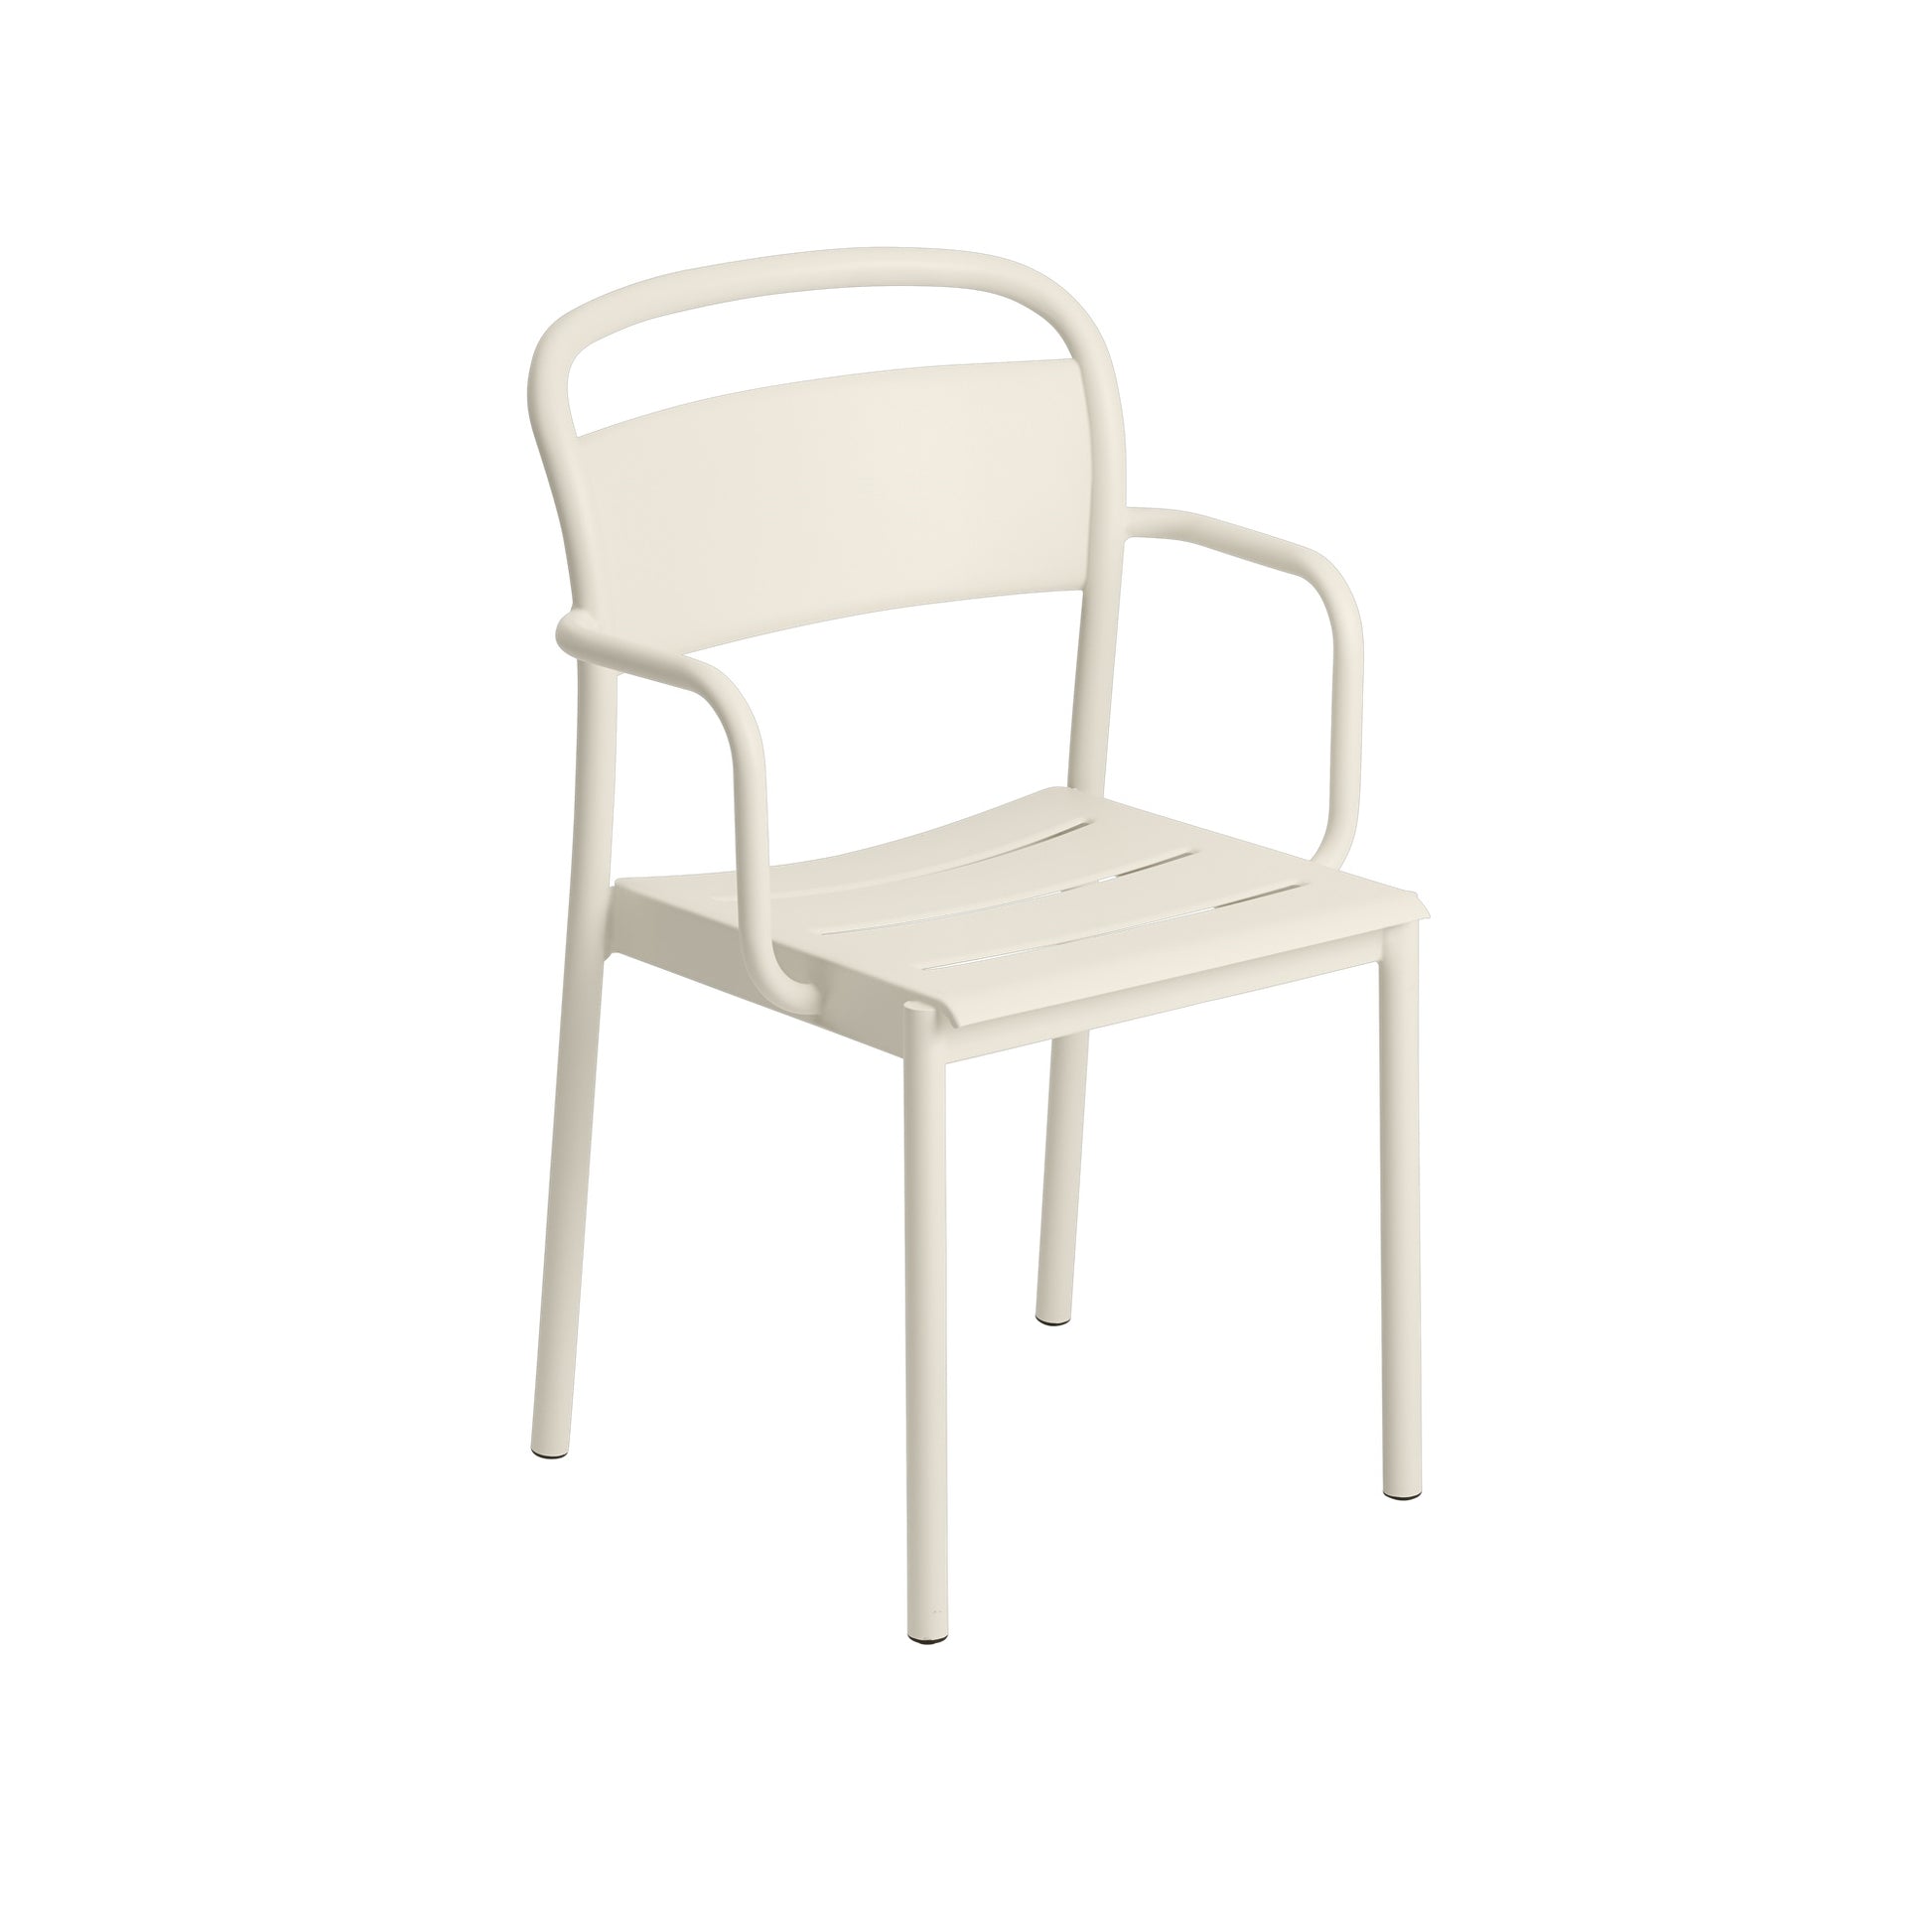 Linear Steel Dining Chair w. Armrest by Muuto #Off-white